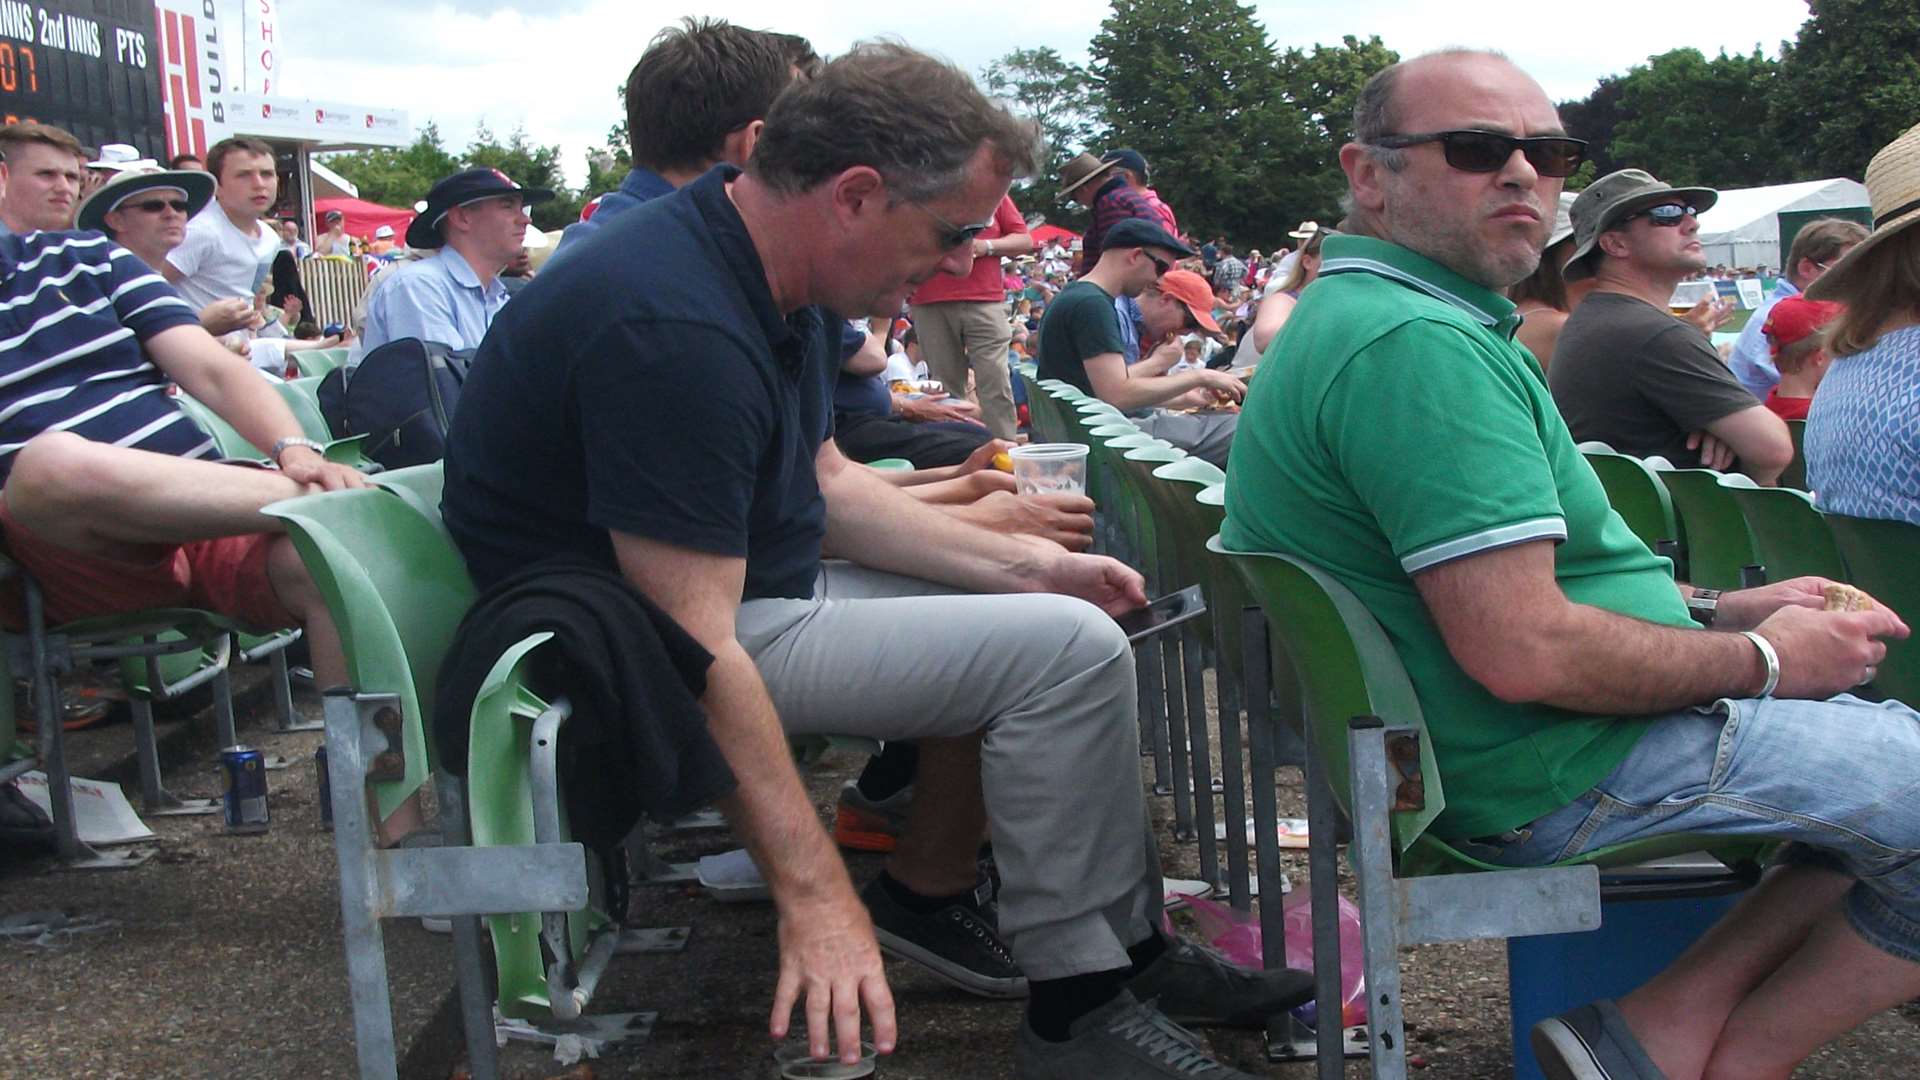 Piers Morgan and Andy Coulson at the cricket.